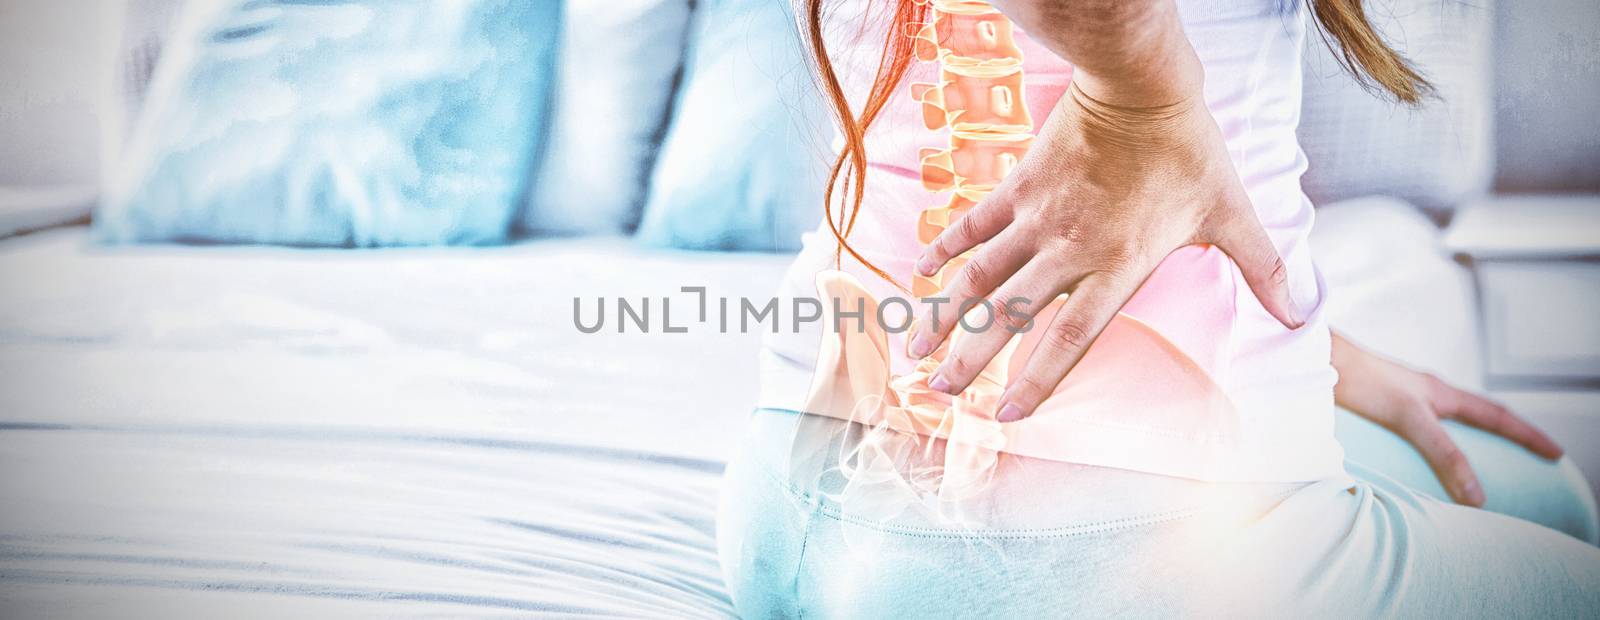 Digital composite of highlighted spine of woman with back pain by Wavebreakmedia